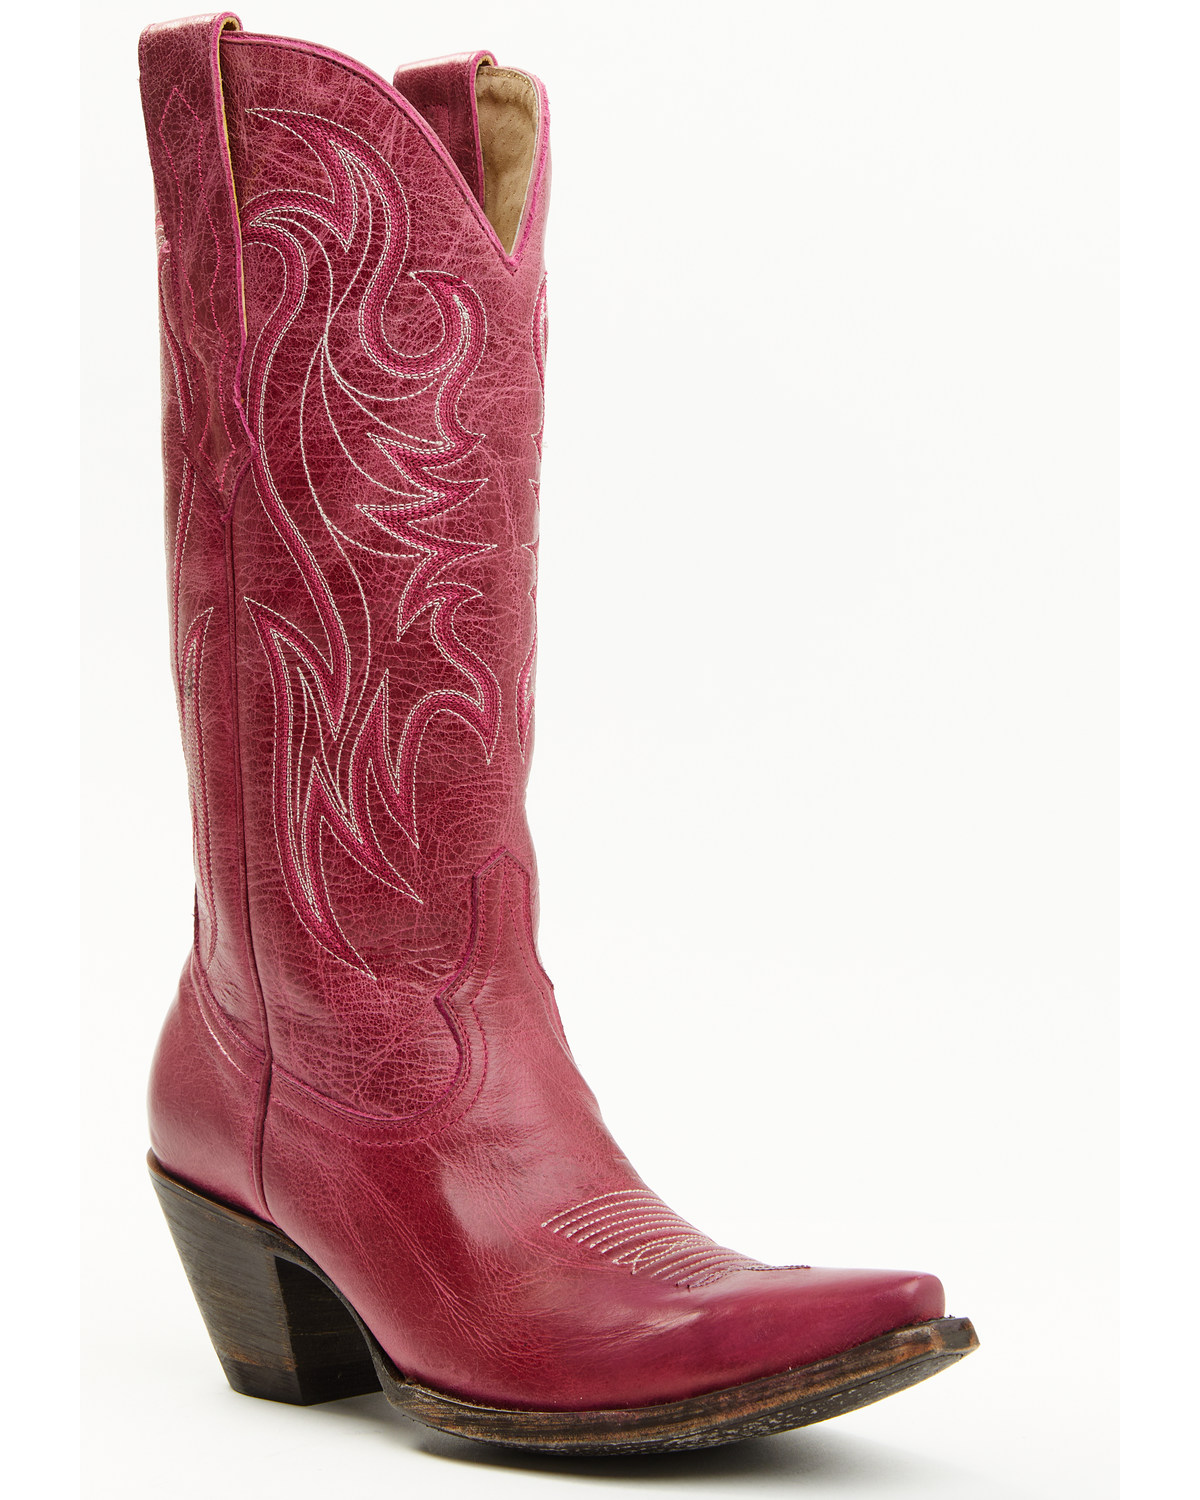 Idyllwind Women's Coming Up Roses Leather Western Boots - Snip Toe